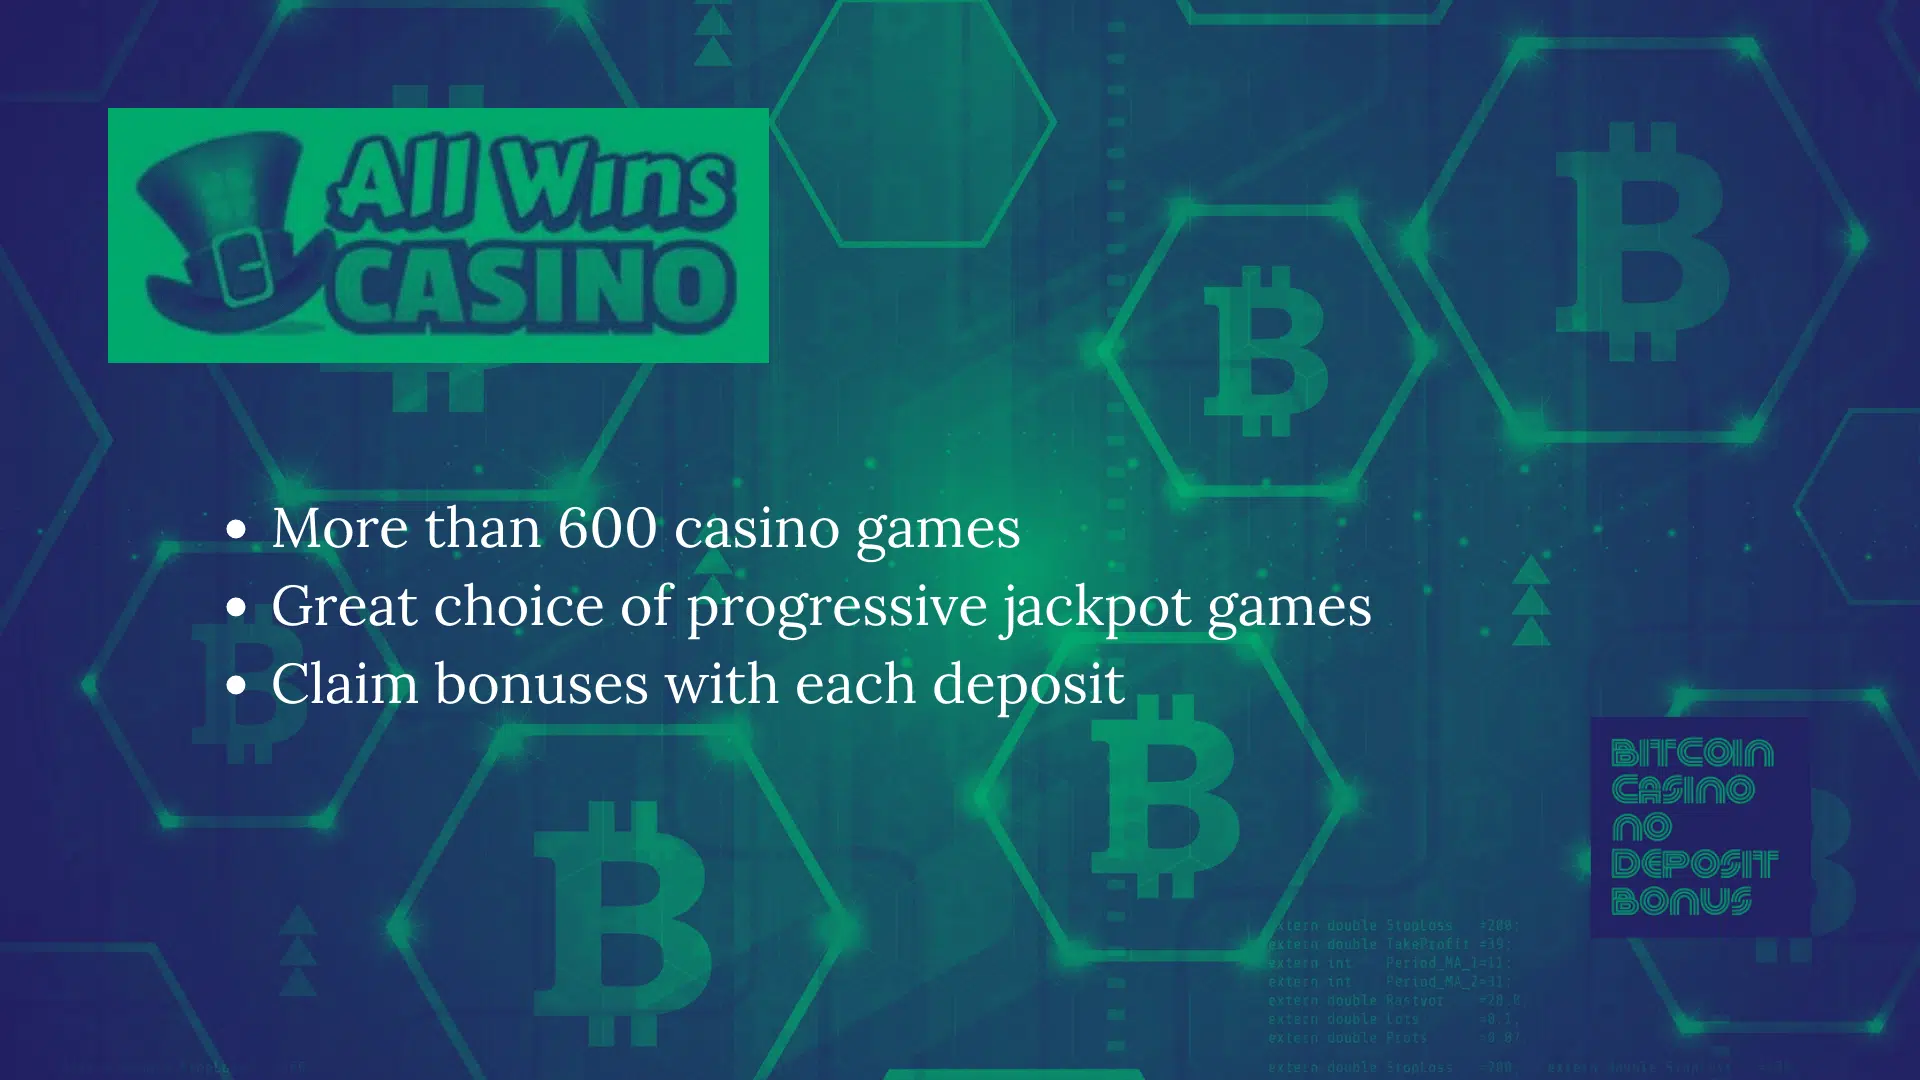 You are currently viewing All Wins Casino Promo Codes – Allwinscasino.com Free Spins December 2022